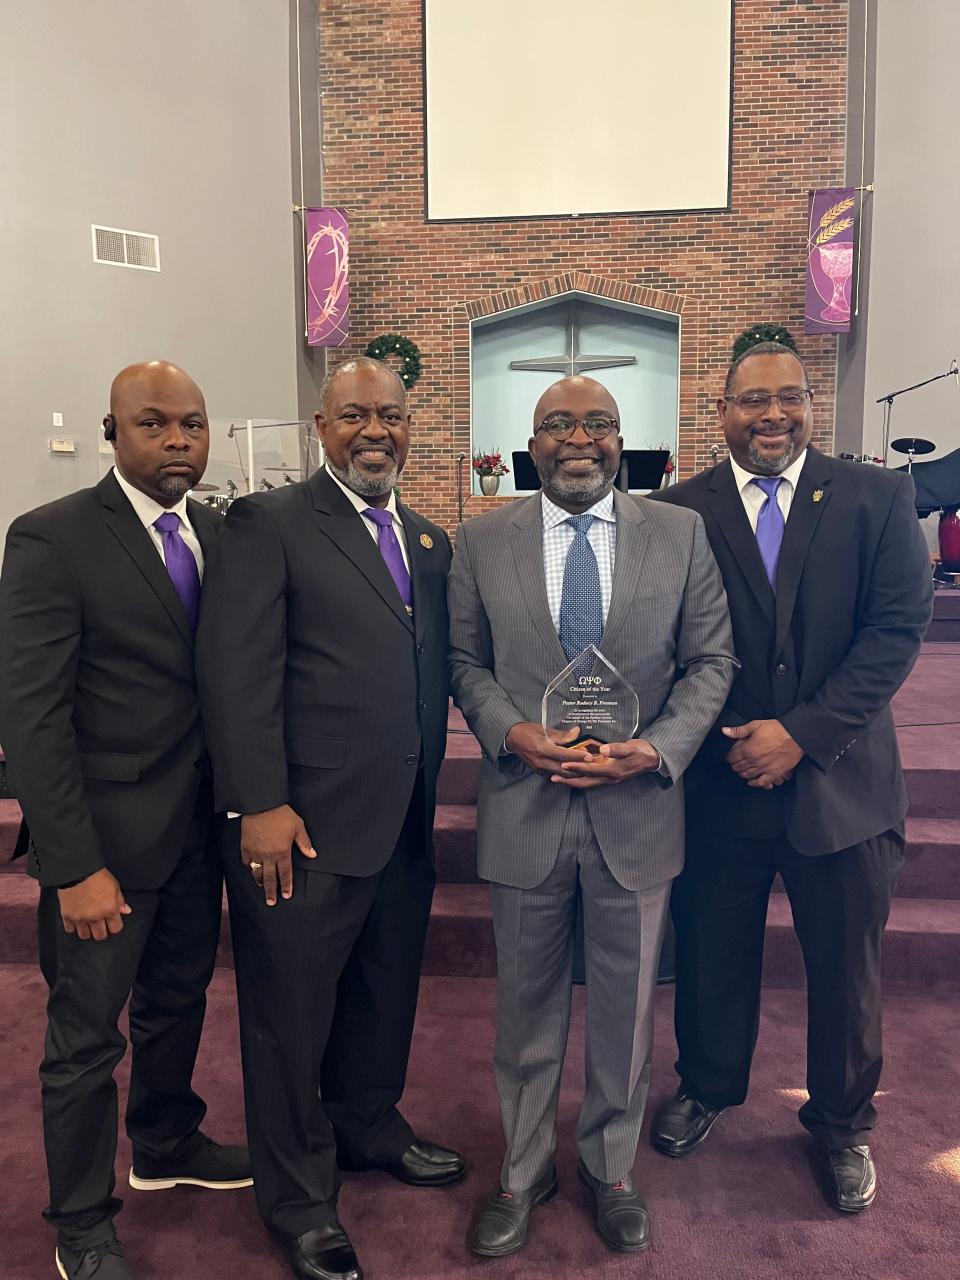 Rodney B. Freeman of Clover, South Carolina standing beside Jonathan Strong, Maury Williams and Andre Corbett who are members of the Epsilon Upsilon Alumnus chapter of Omega Psi Phi Fraternity, Inc. Freeman received the 71st annual "Outstanding Citizen of the Year," award for his leadership and community service as a pastor in Gastonia's Mount Zion Restoration Church, serving food to more than 100,000 residents throughout Gaston County in need via the church's food pantry.